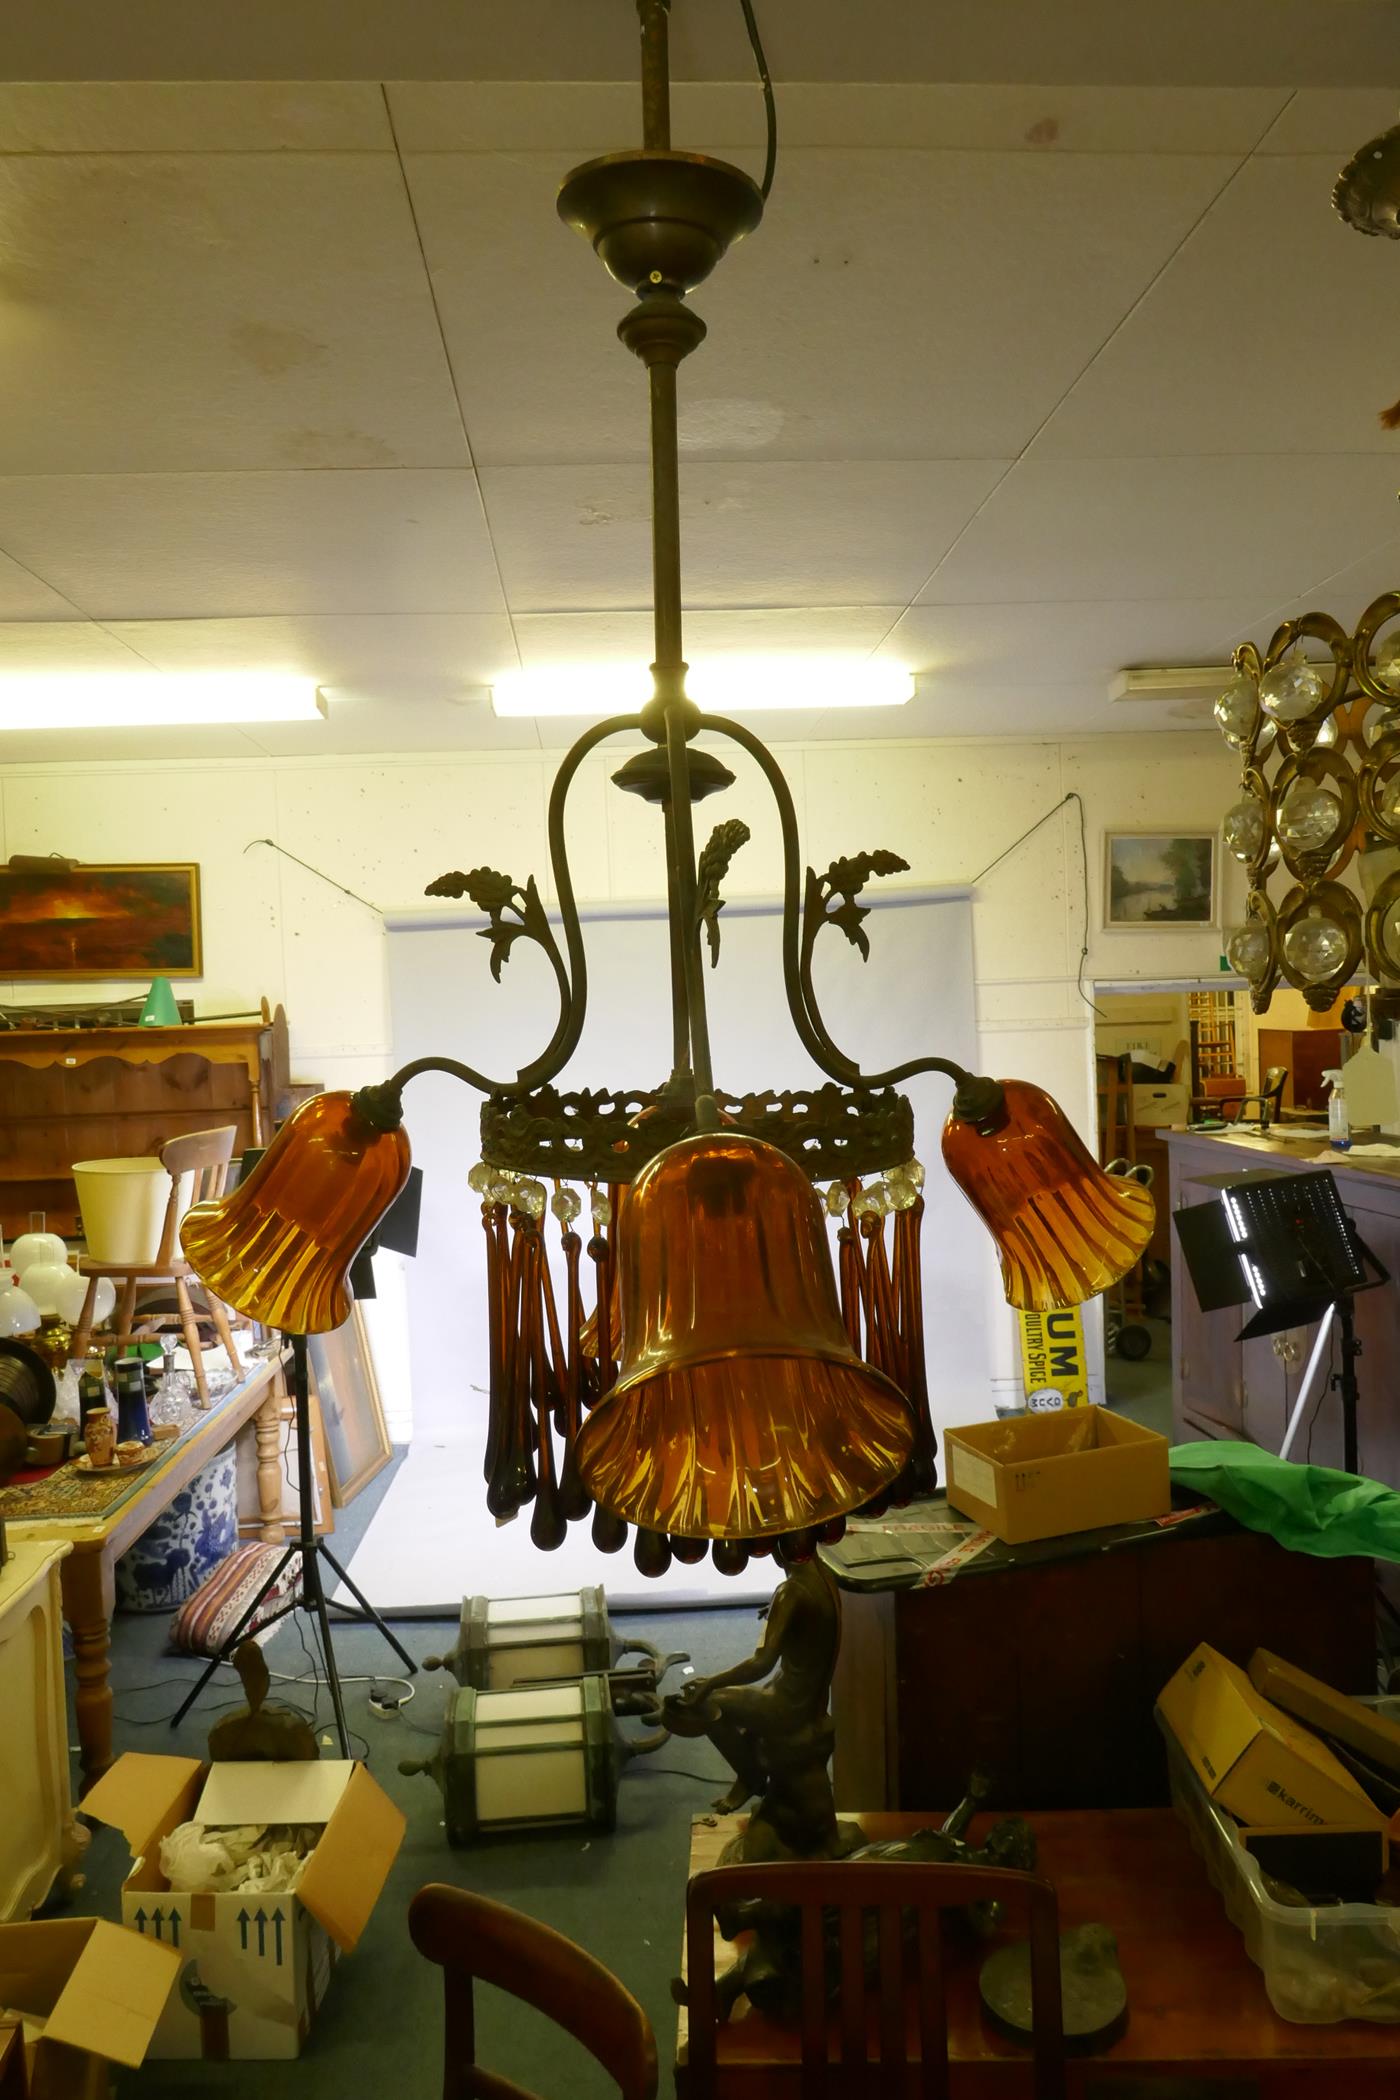 An early C19th continental pendant ceiling light with three branches and amber glass drops and - Image 2 of 4